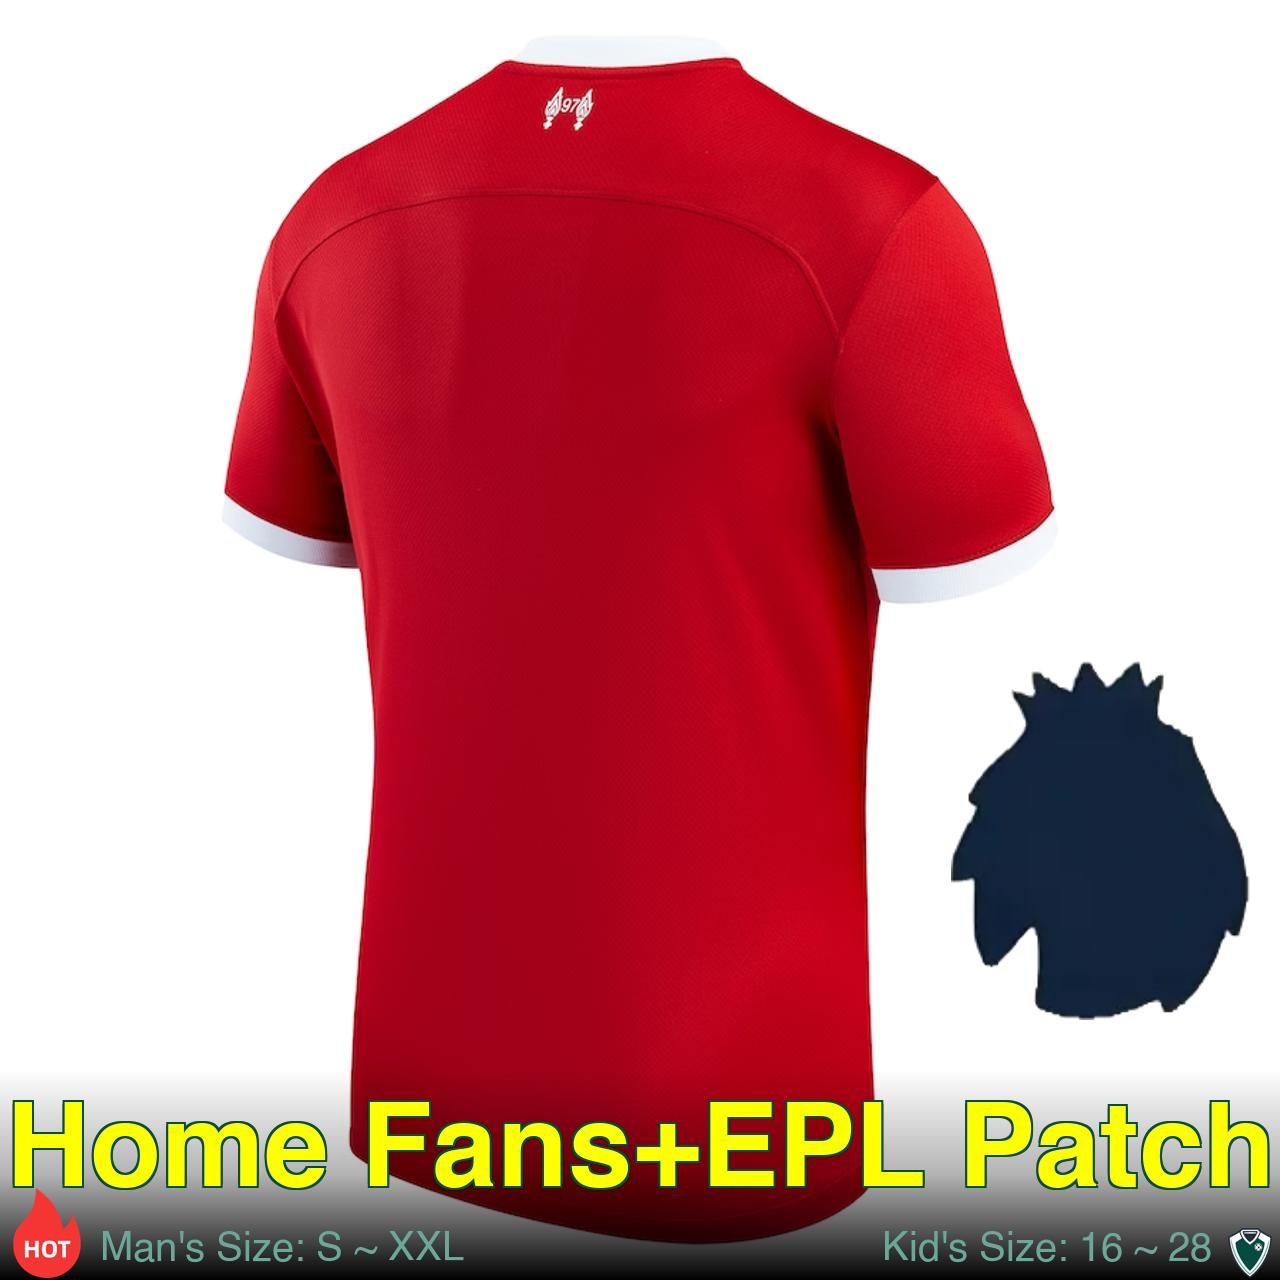 Home Fans+EPL Patch